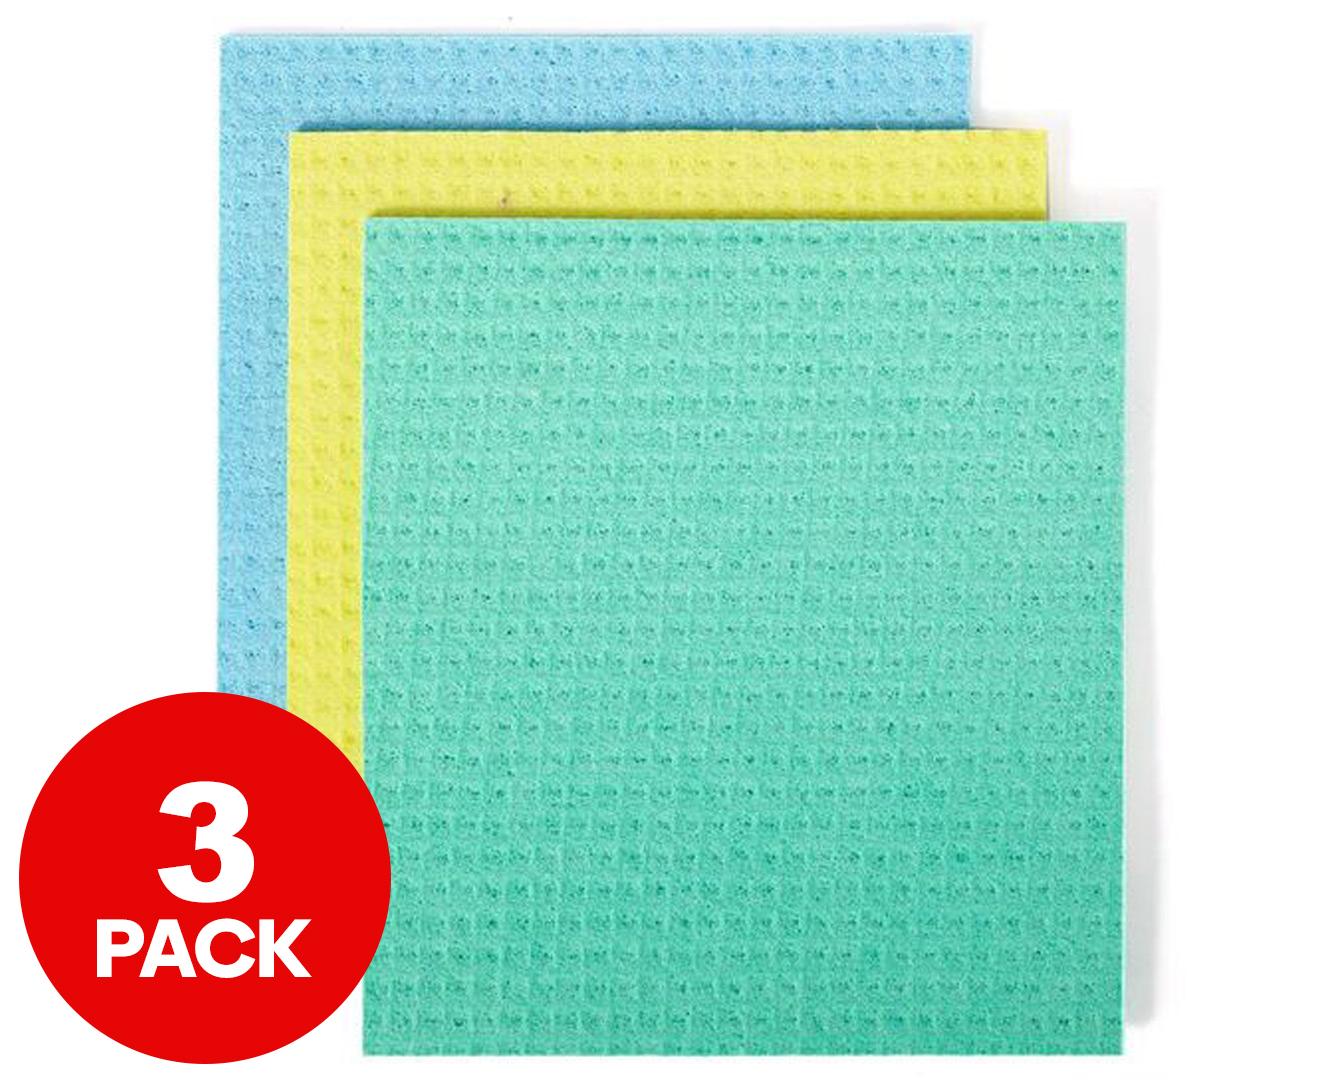 Squeeze Multicolored Cellulose Sponge Cloths Set of 3 - New